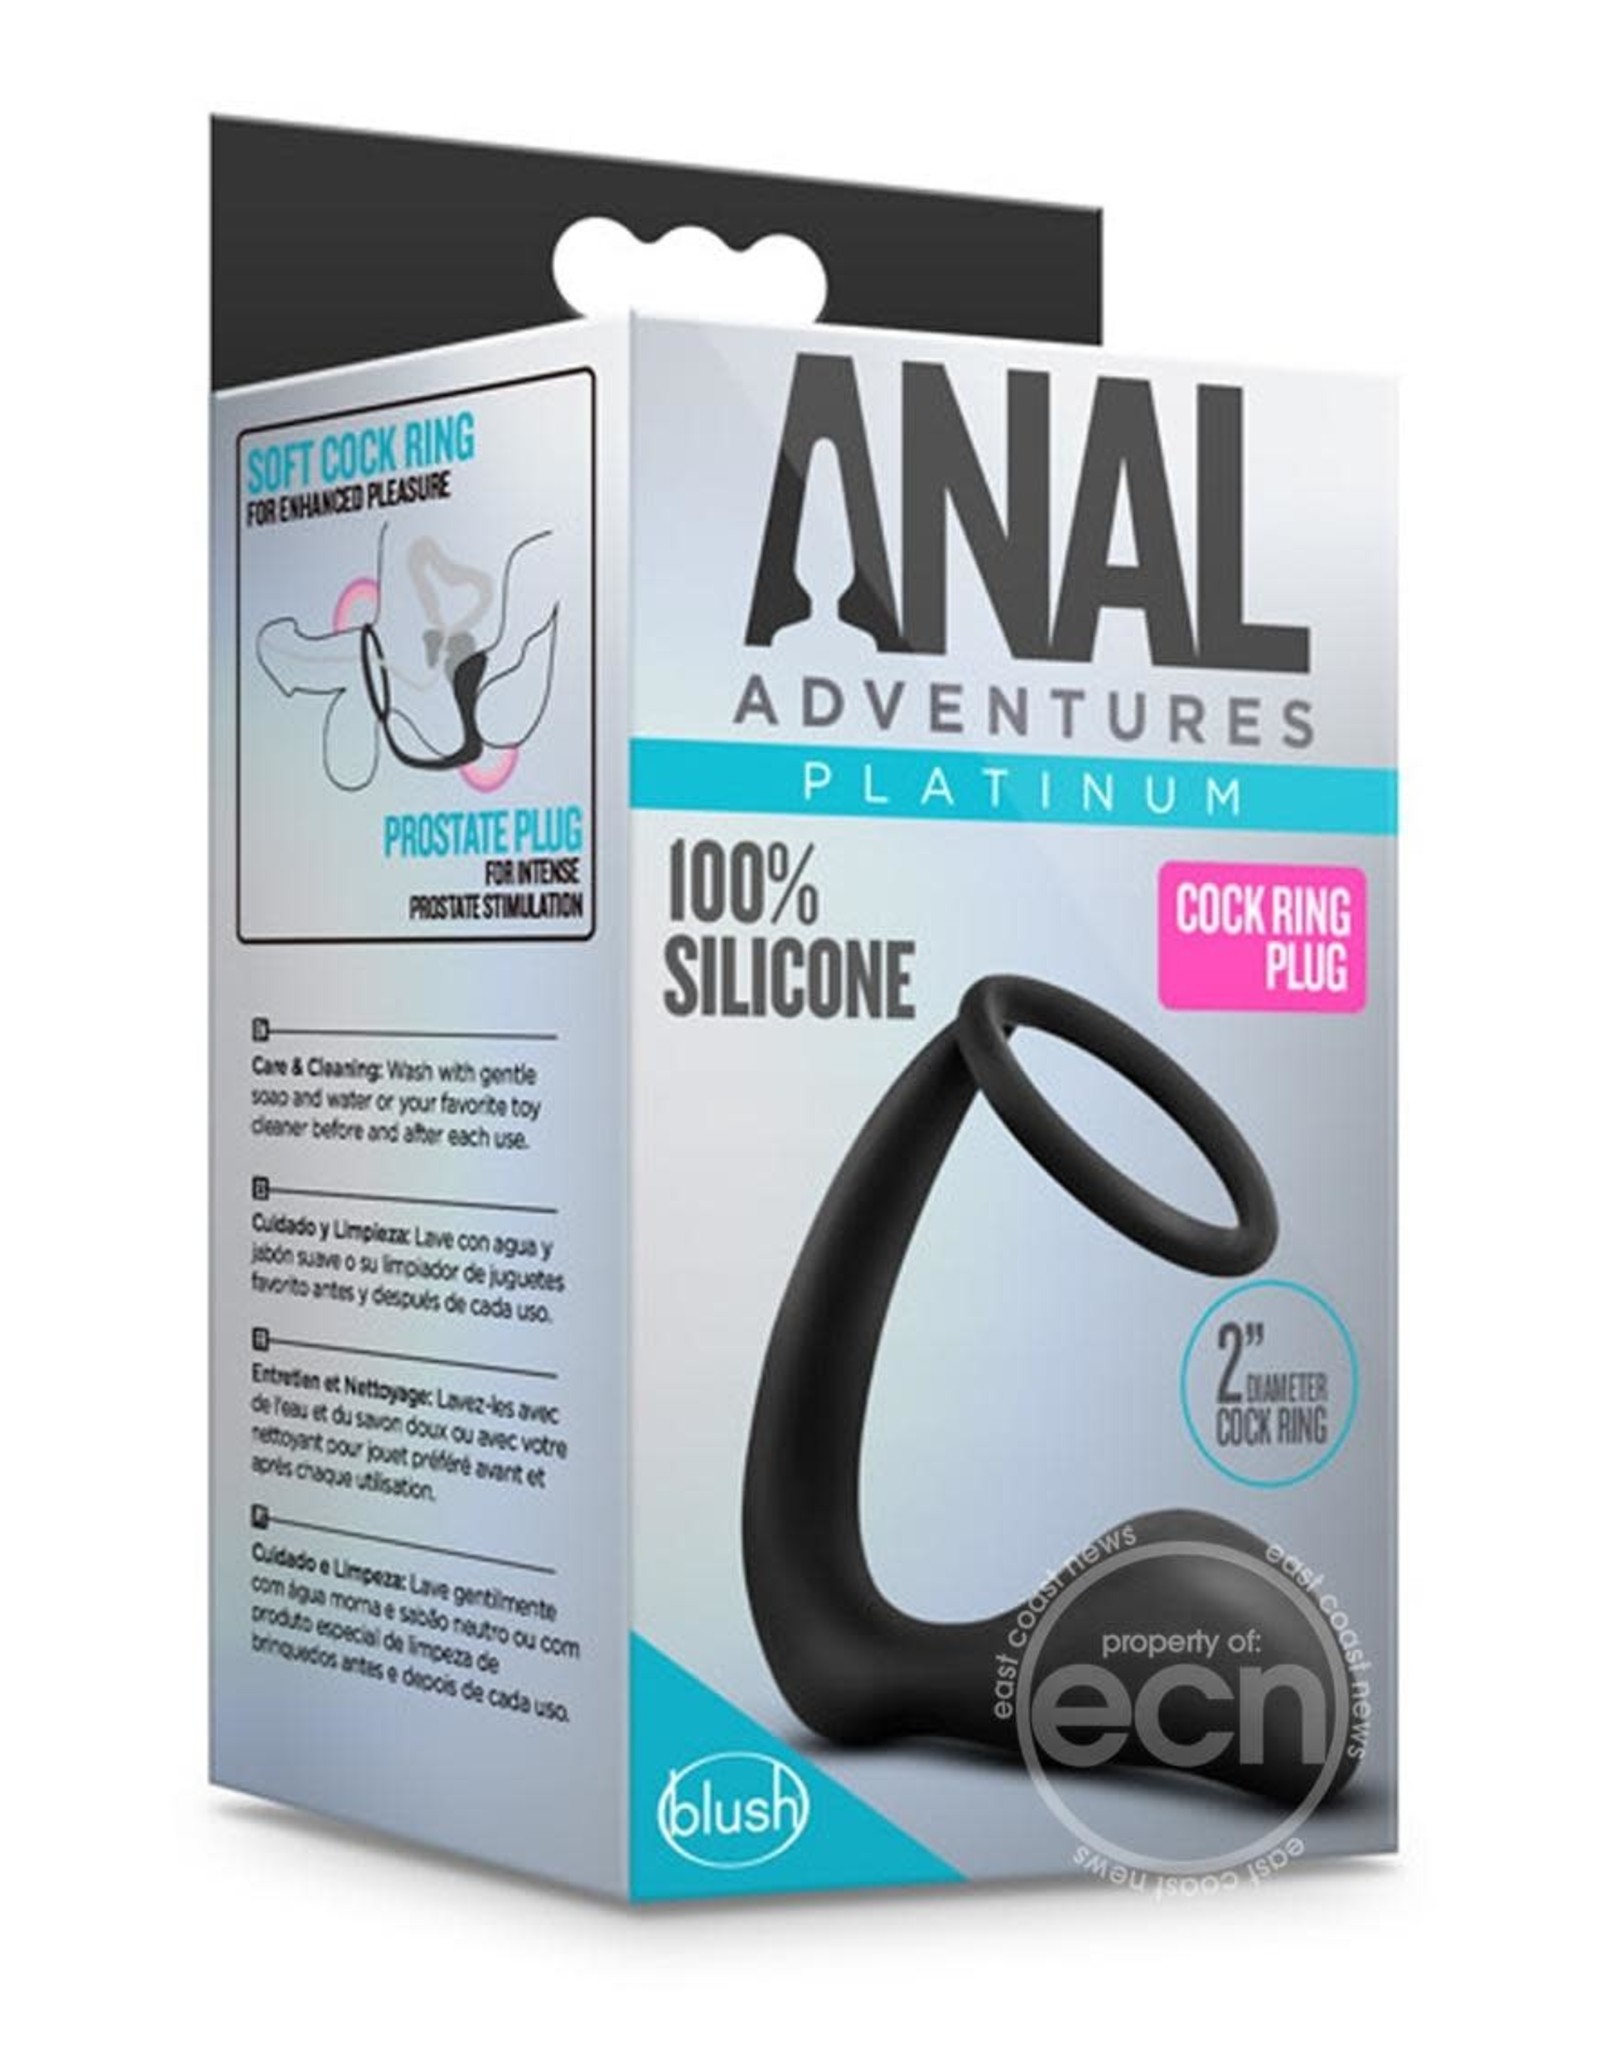 BLUSH NOVELTIES ANAL ADVENTURES PLATINUM SILICONE COCK RING AND BUTT PLUG